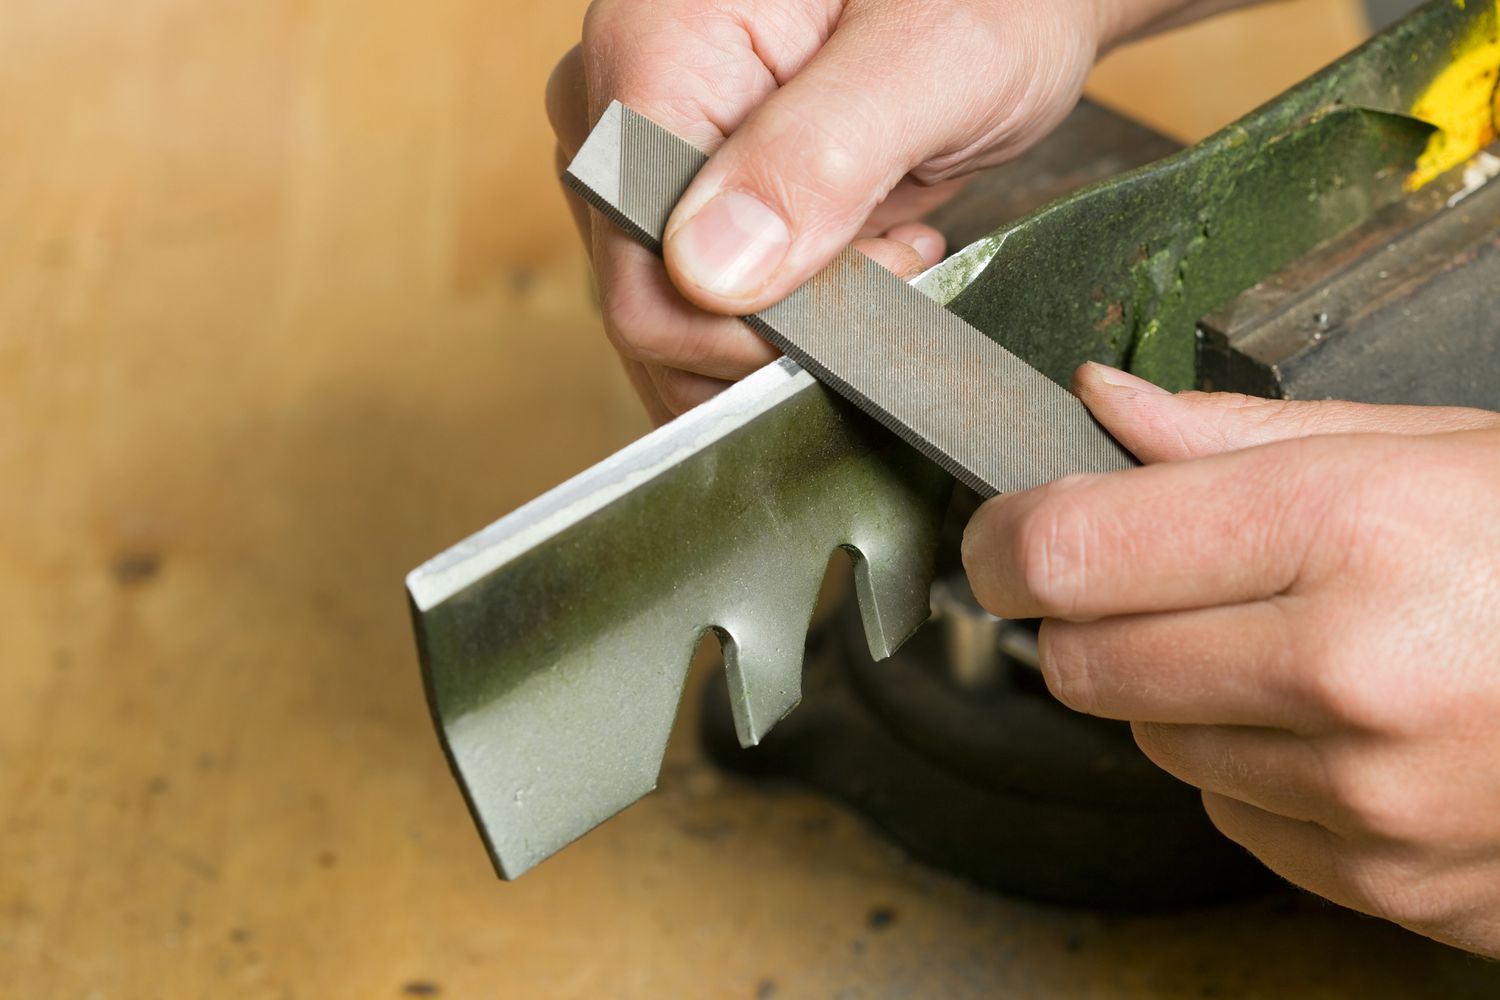 Where To Get Lawnmower Blades Sharpened